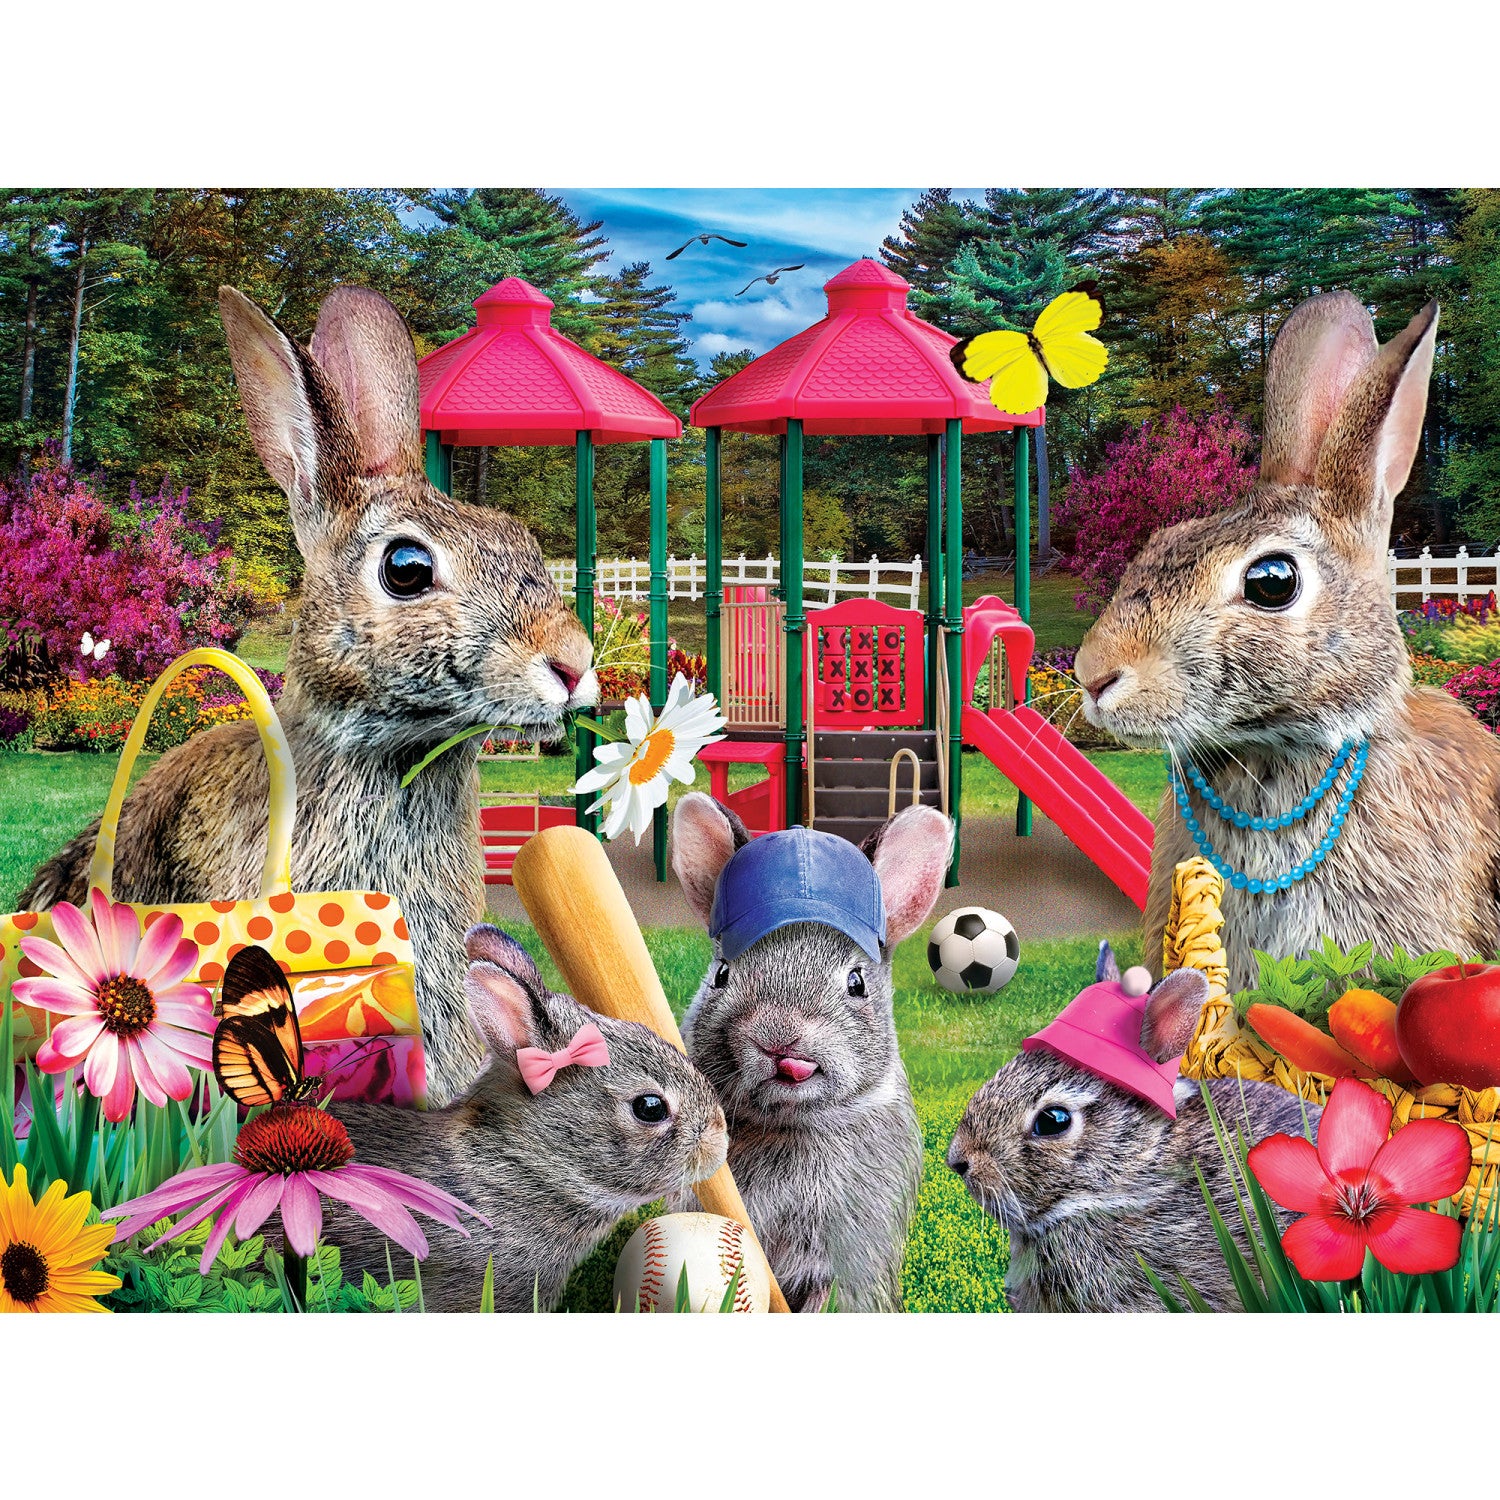 Wild & Whimsical - Playdate at the Park 300 Piece EZ Grip Puzzle